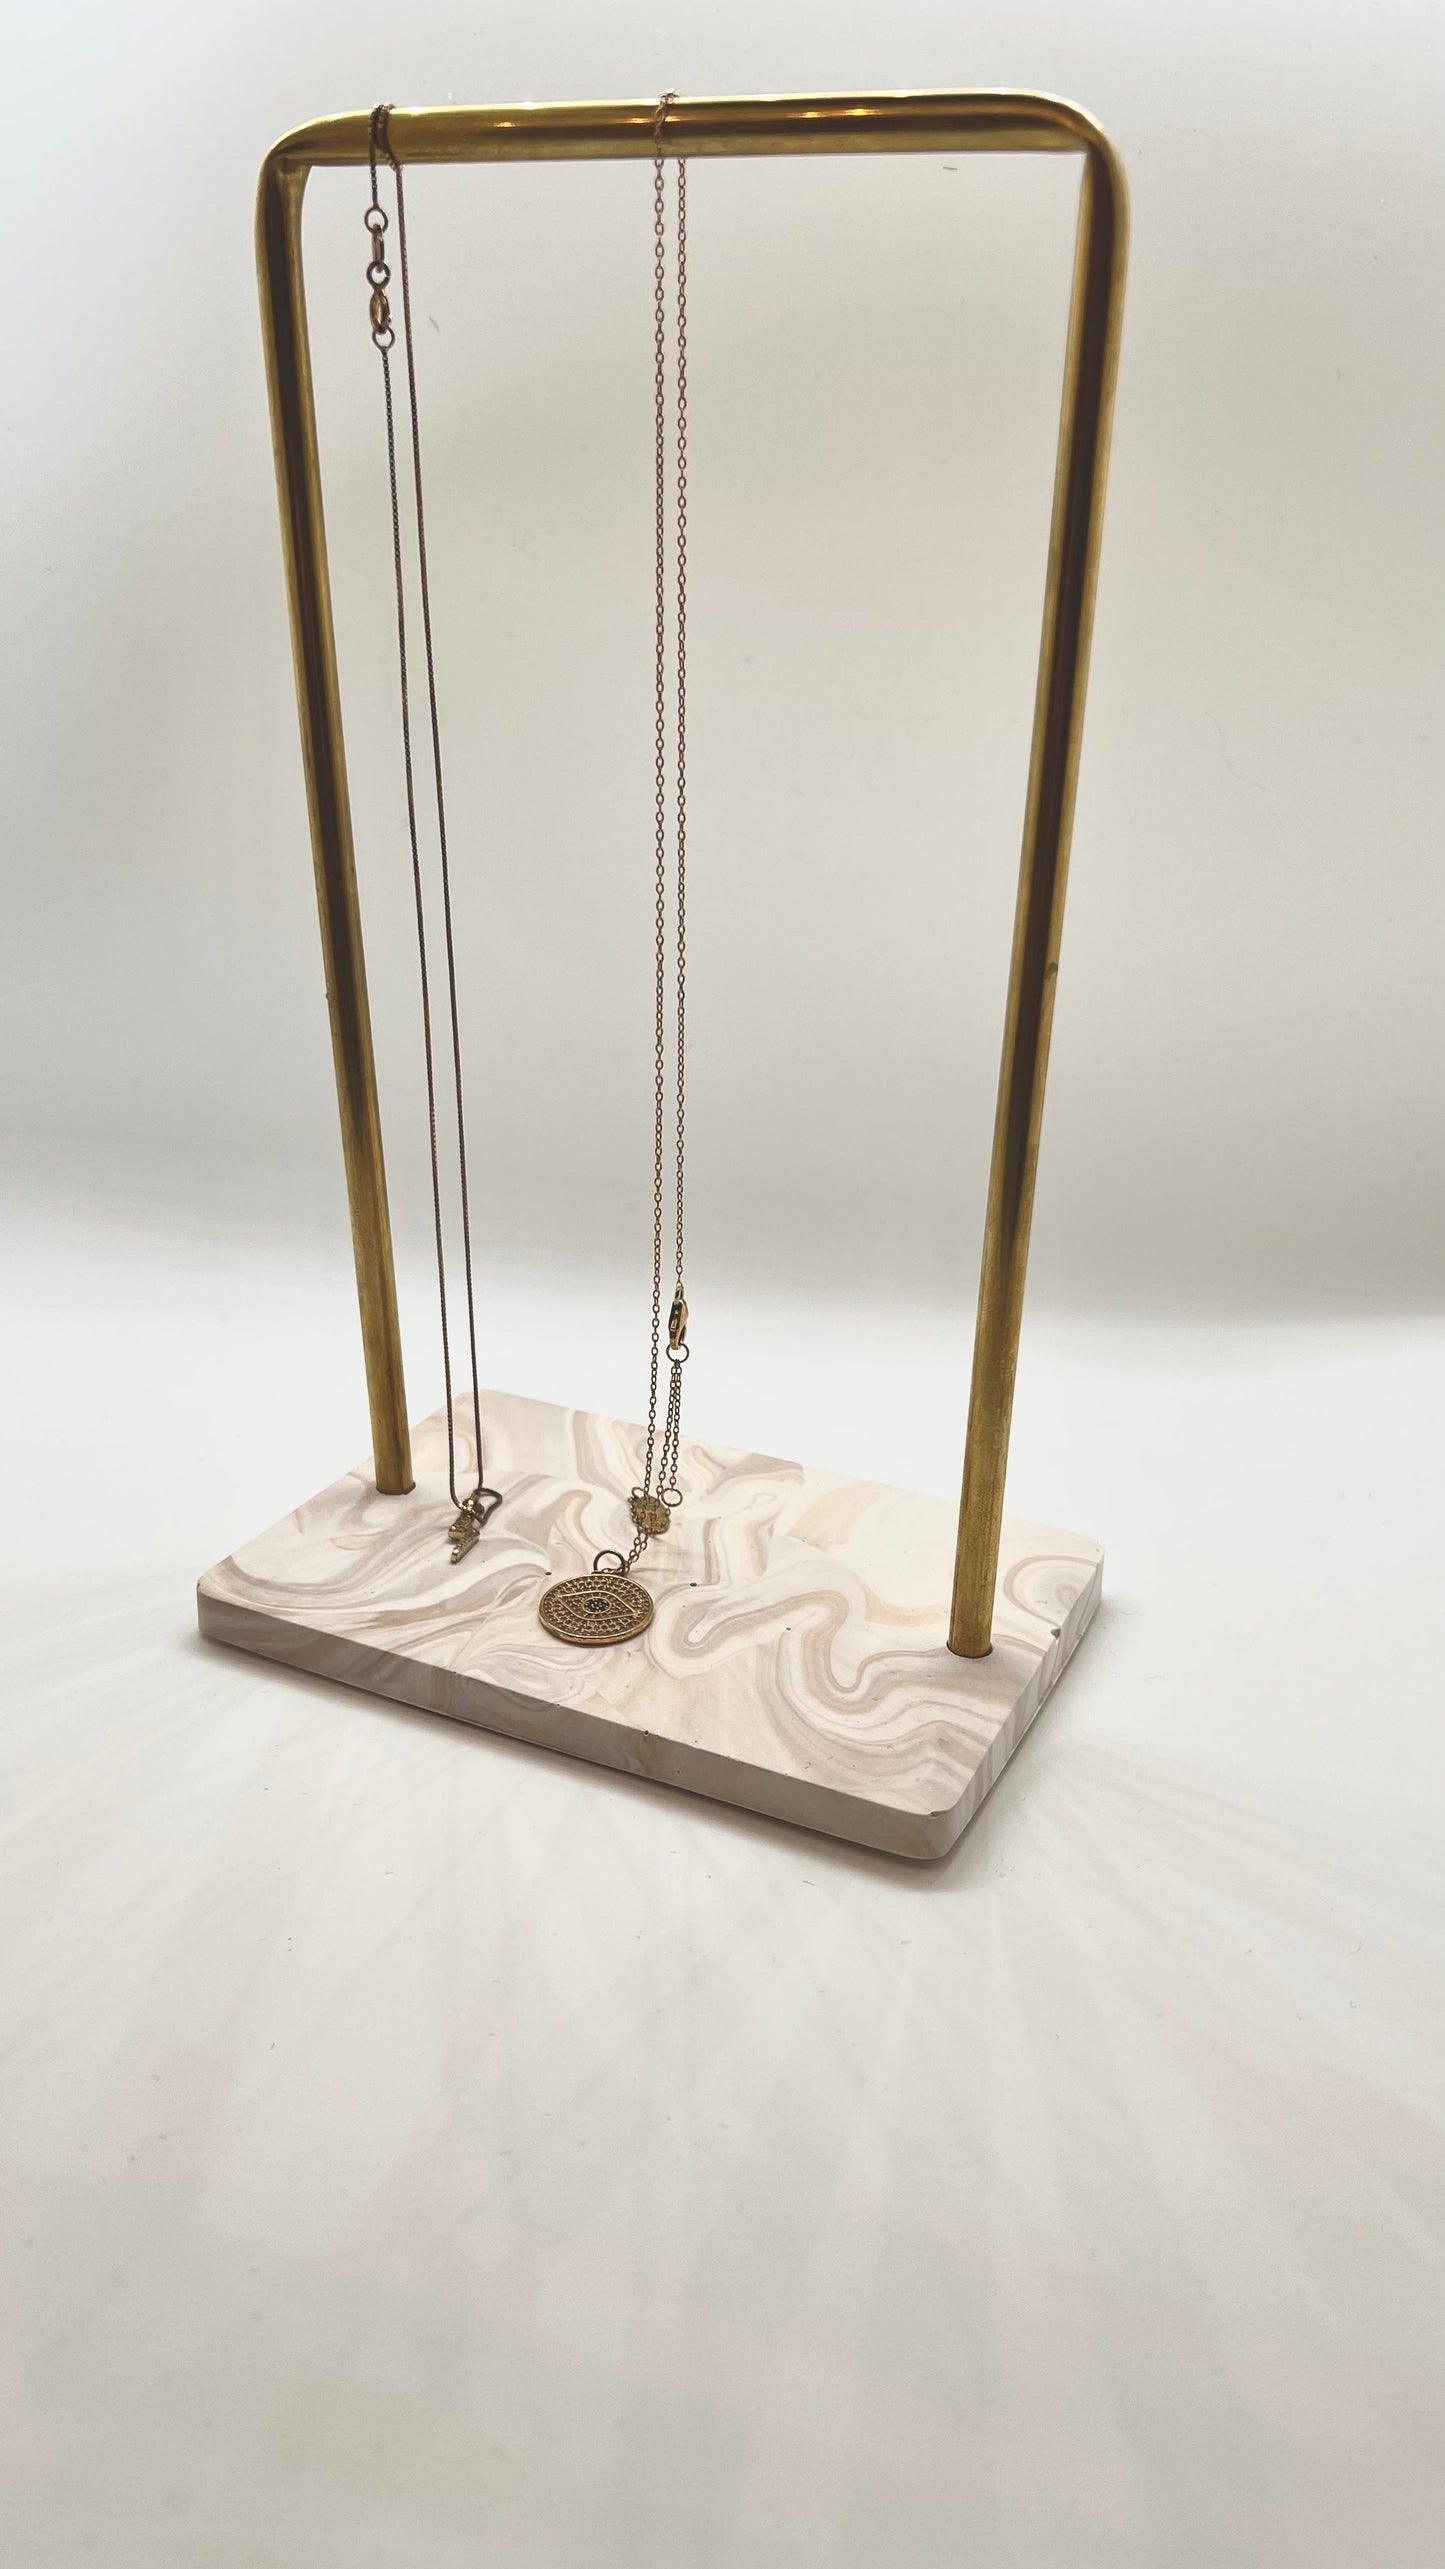 Marble & Brass necklace hanger - EMB Pretty